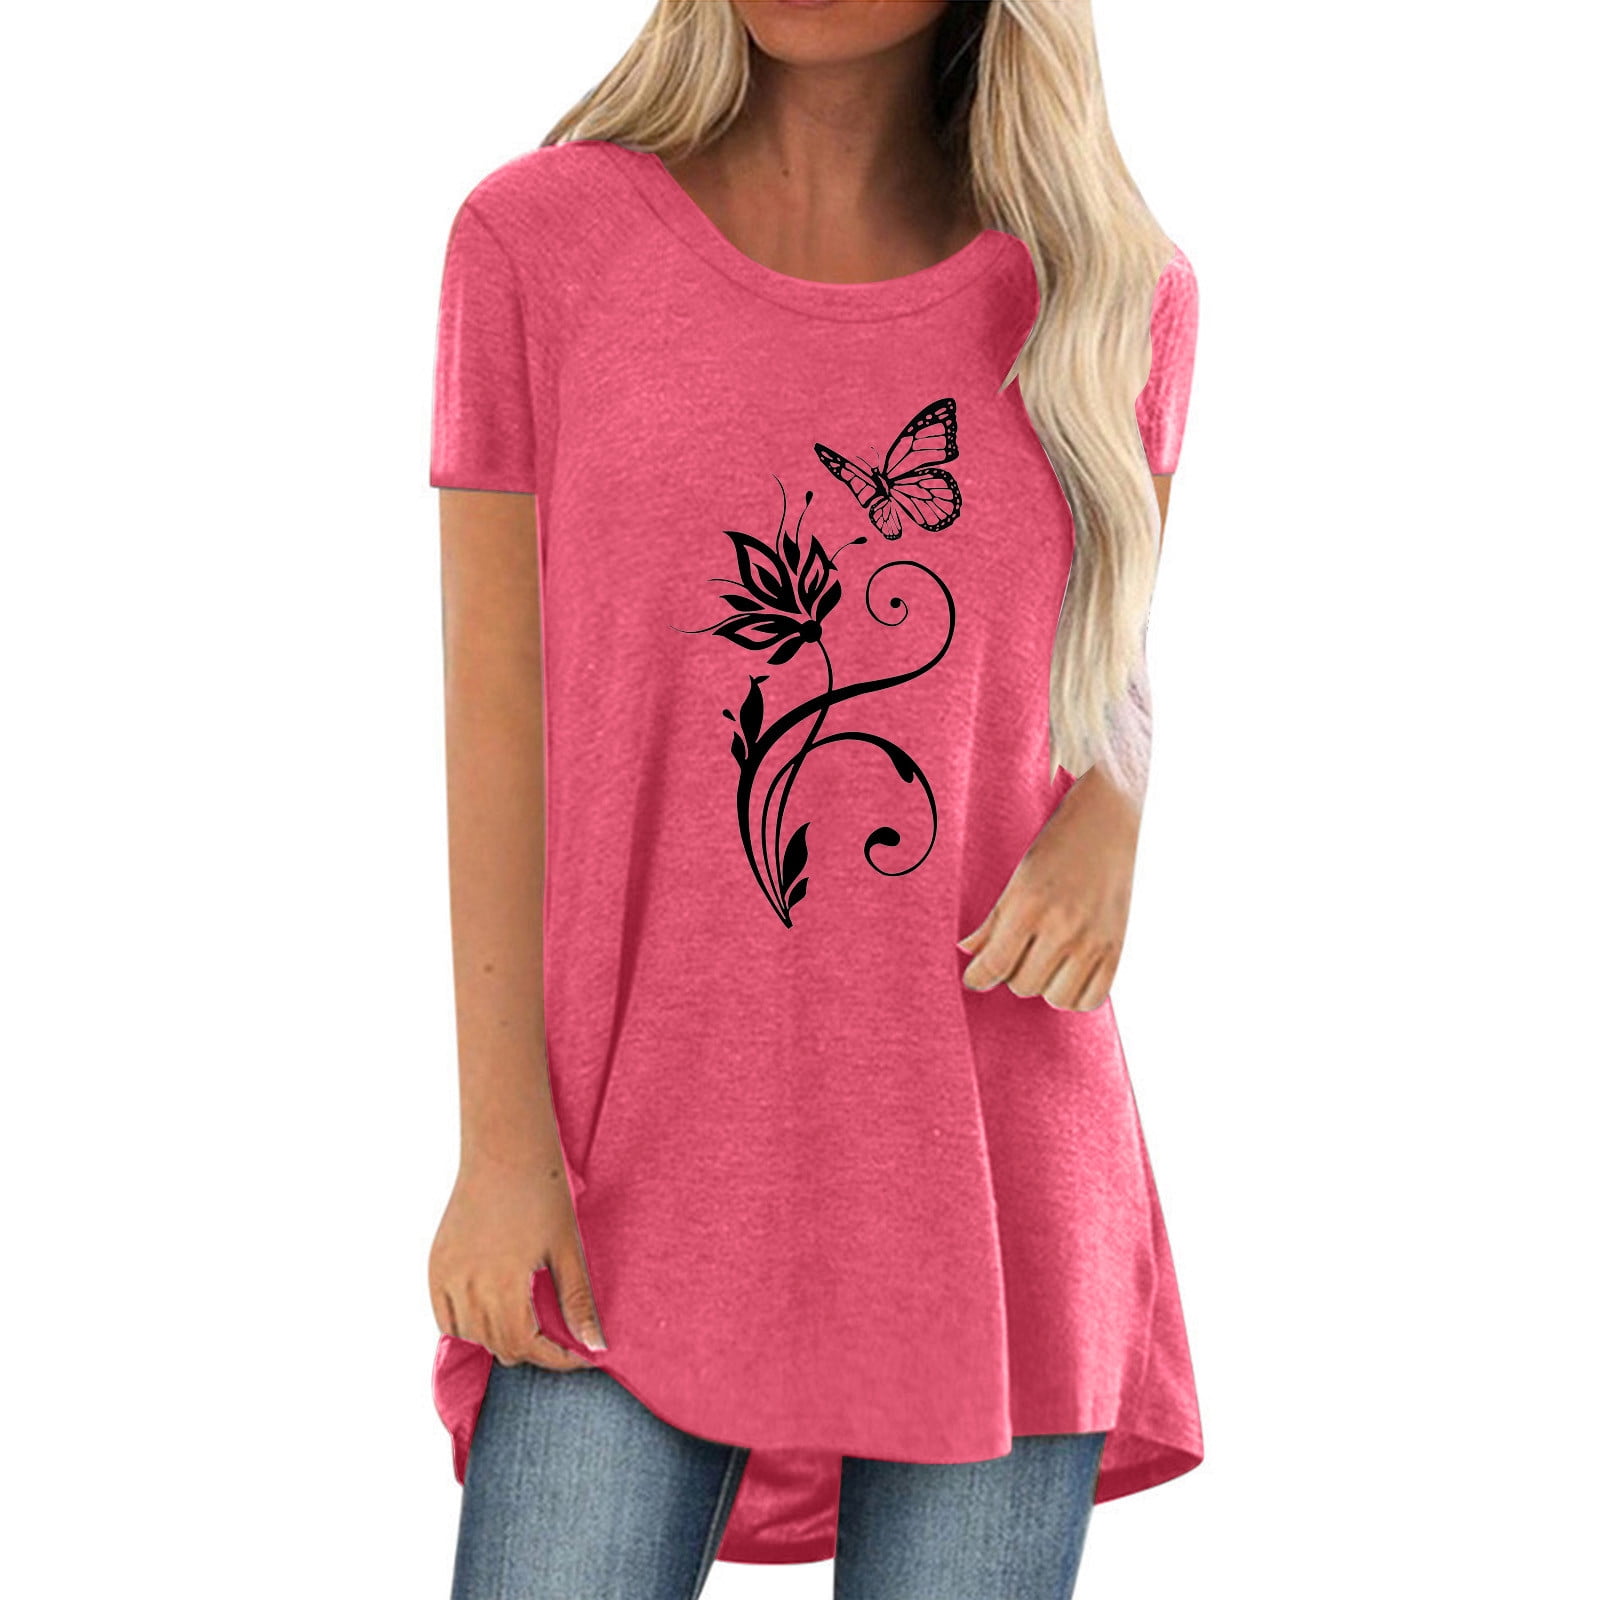 Xihbxyly Tunic Tops for Women Loose Fit, Short Sleeve Shirts for Women  Summer Tunic Tops to Wear Tshirts Loose Casual Blouse Tee Printed Folwy  Shirt, Pink, S 1 Dollar Items for Girls #